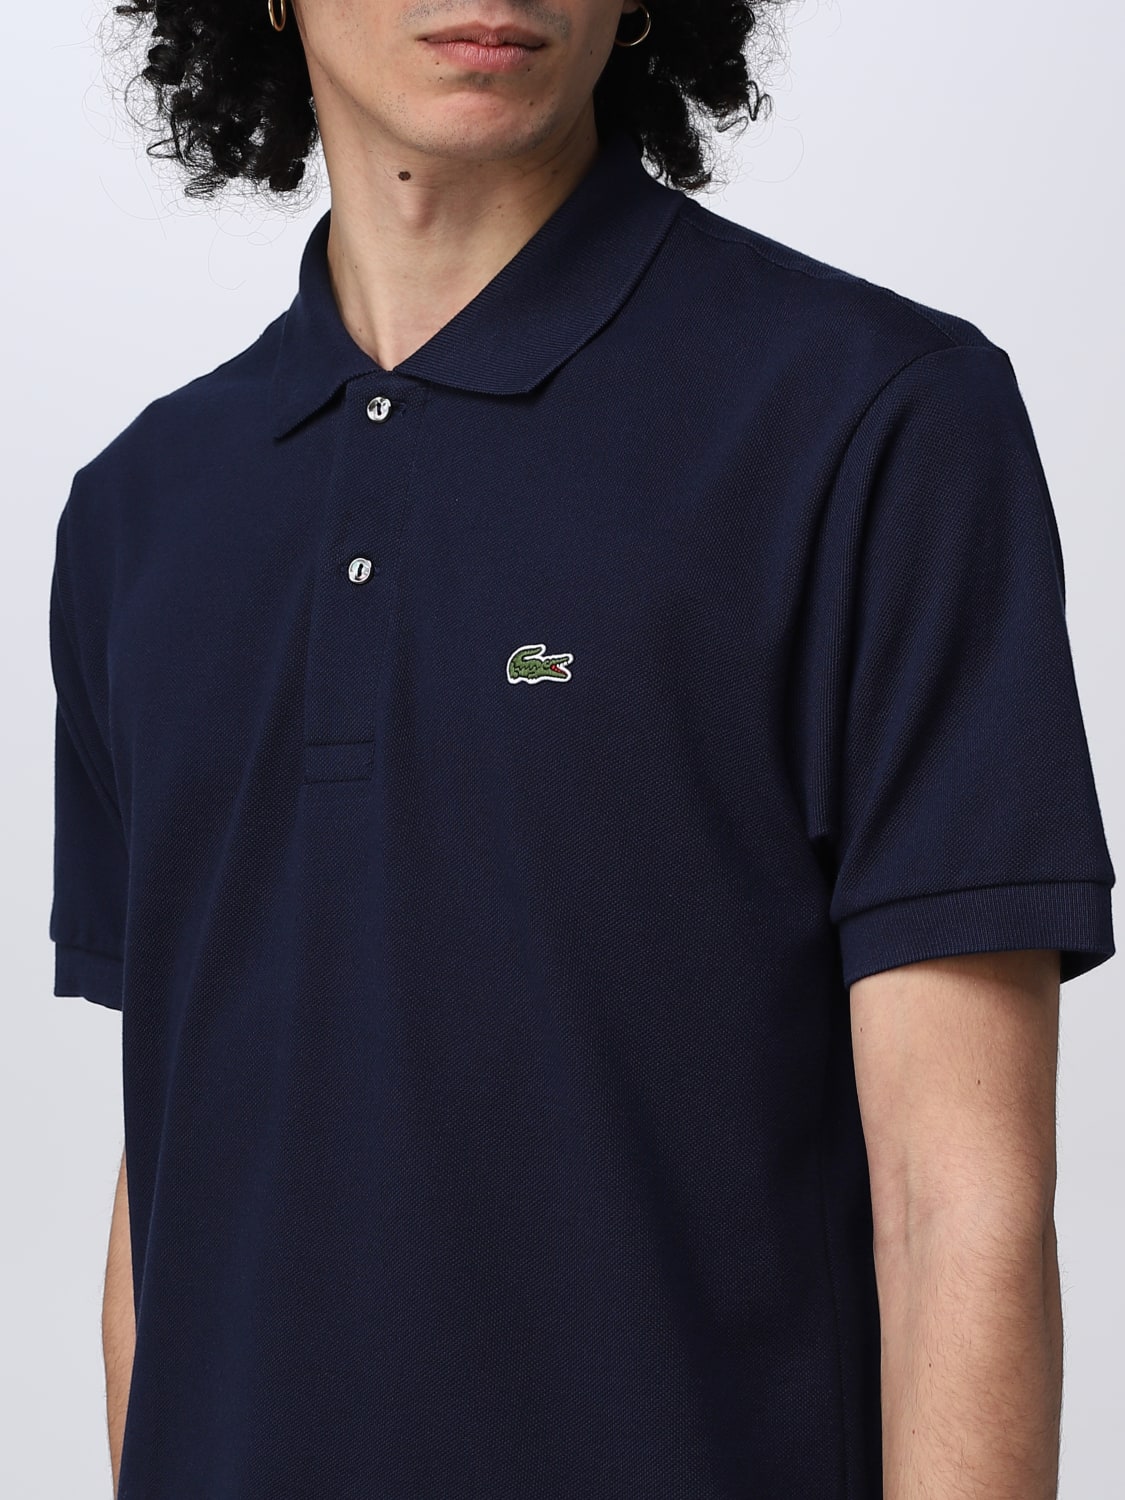 shirt Outlet: Lacoste man at polo L1212 Navy shirt Lacoste | for online - polo